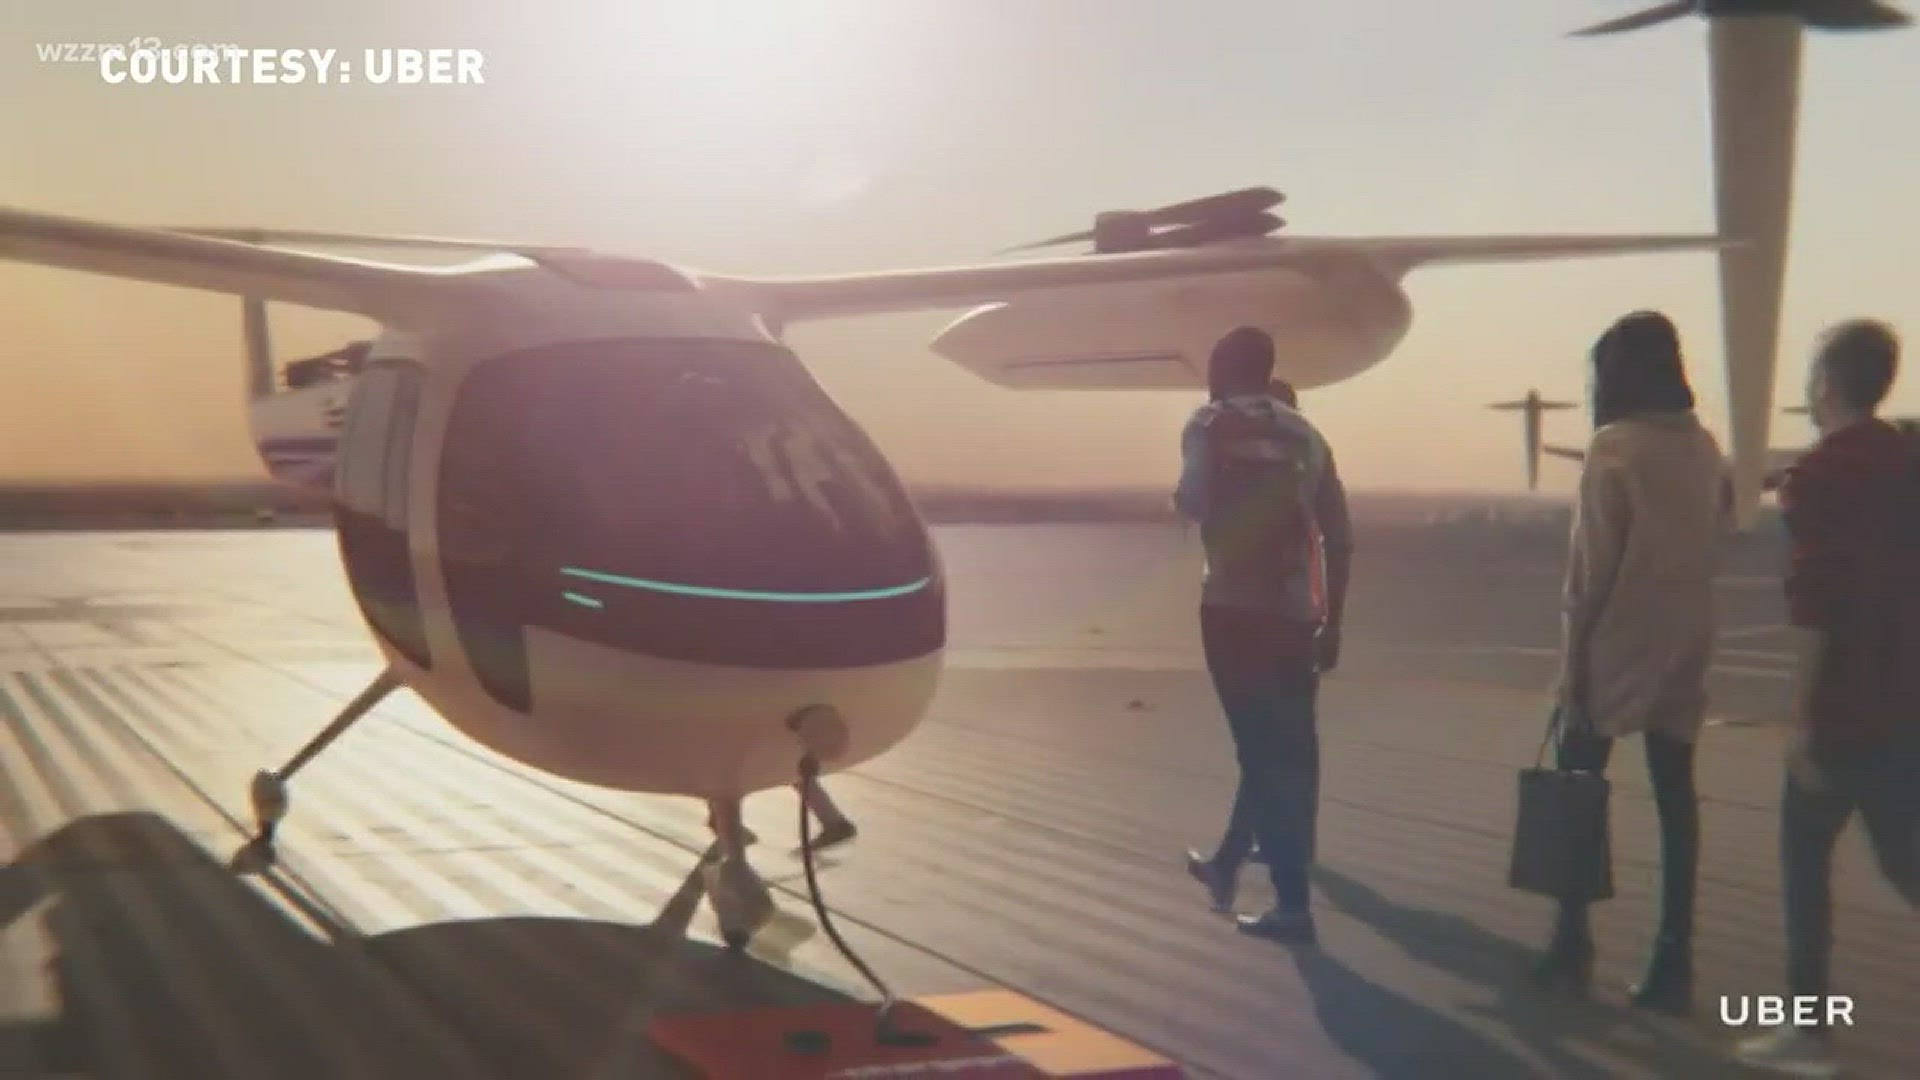 FBHW: Uber says air taxis are coming in the next 5 years